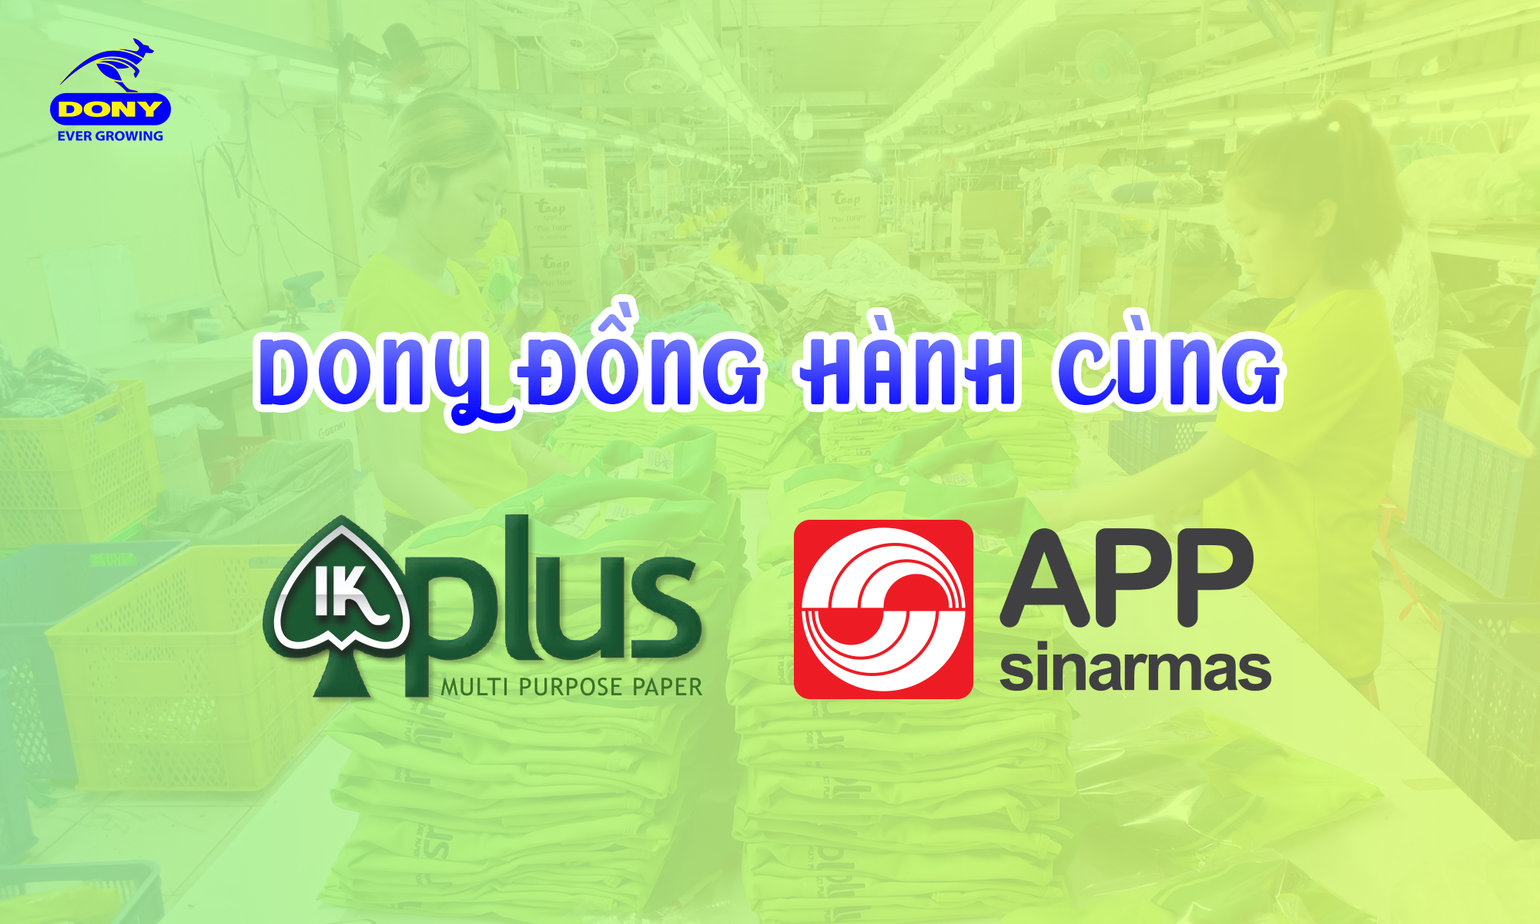 - IK PLUS BRAND UNDER THE ASIA PULP & PAPER (APP) SINAR MAS COMPANY IN COOPERATION WITH DONY